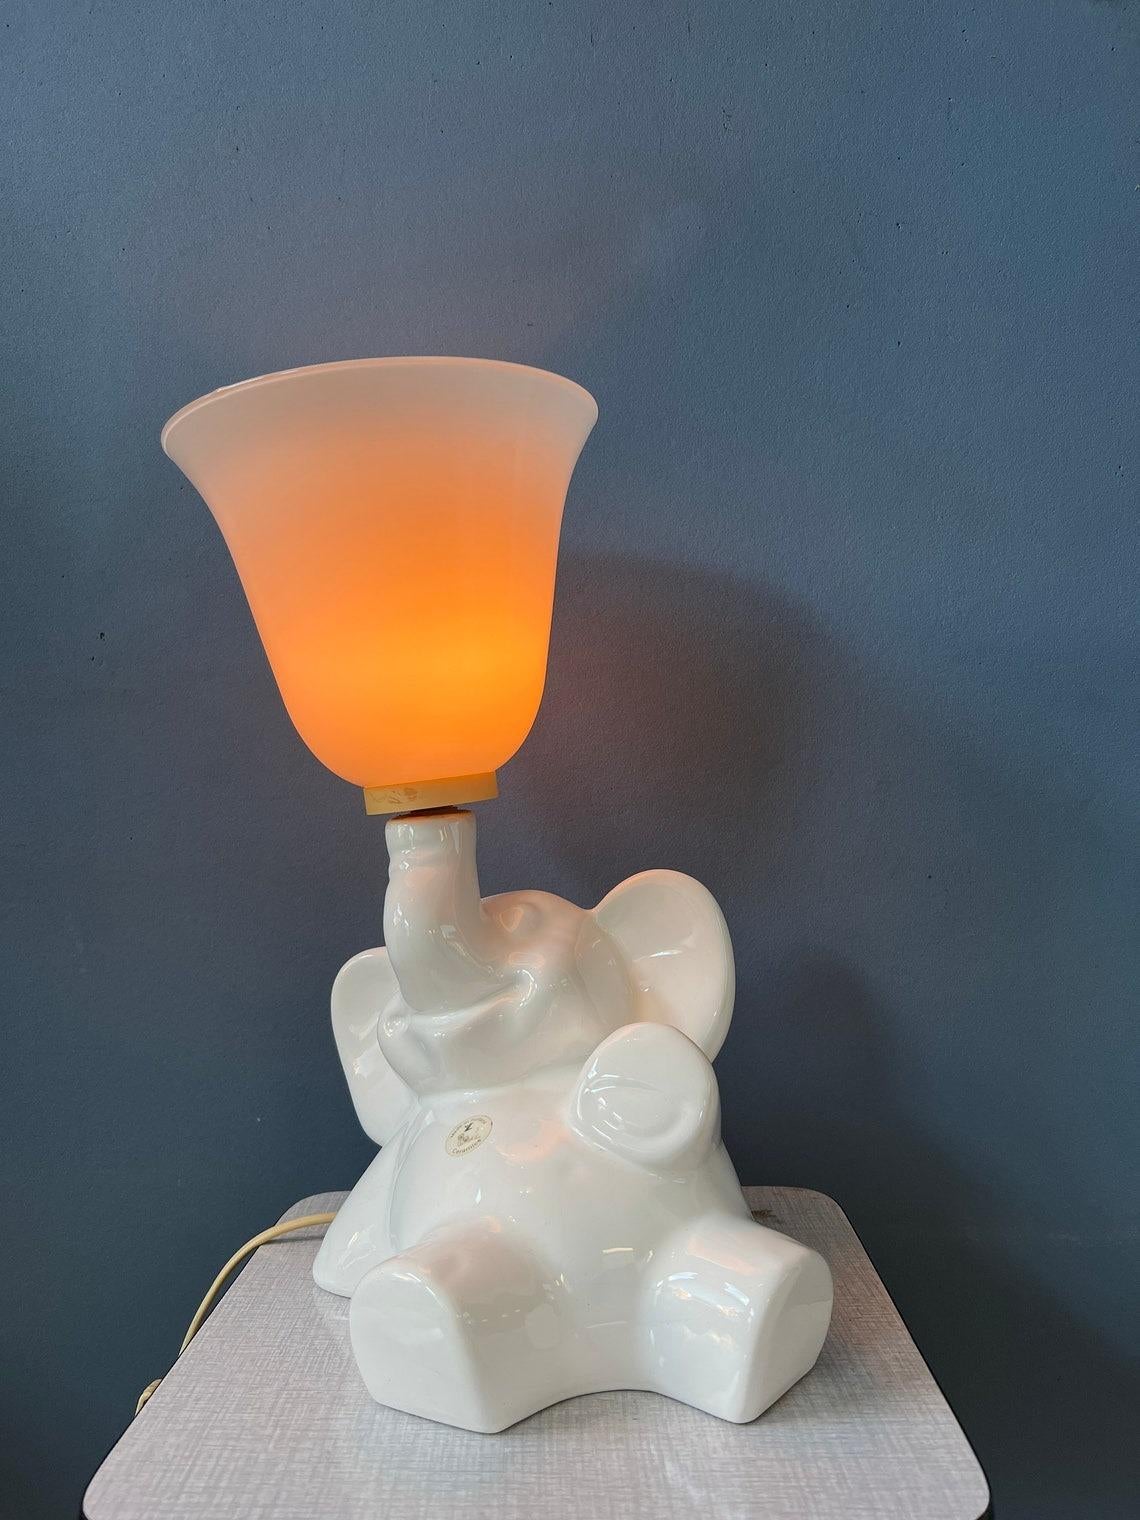 Rare porcelain elephant lamp with a glass shade. The horn-like shade can attached to the porcelain elephant separately. The lamp requires an E27 lightbulb and currently has an EU-plug.

Additional information:
Materials: Stone
Period: 1970s
Height